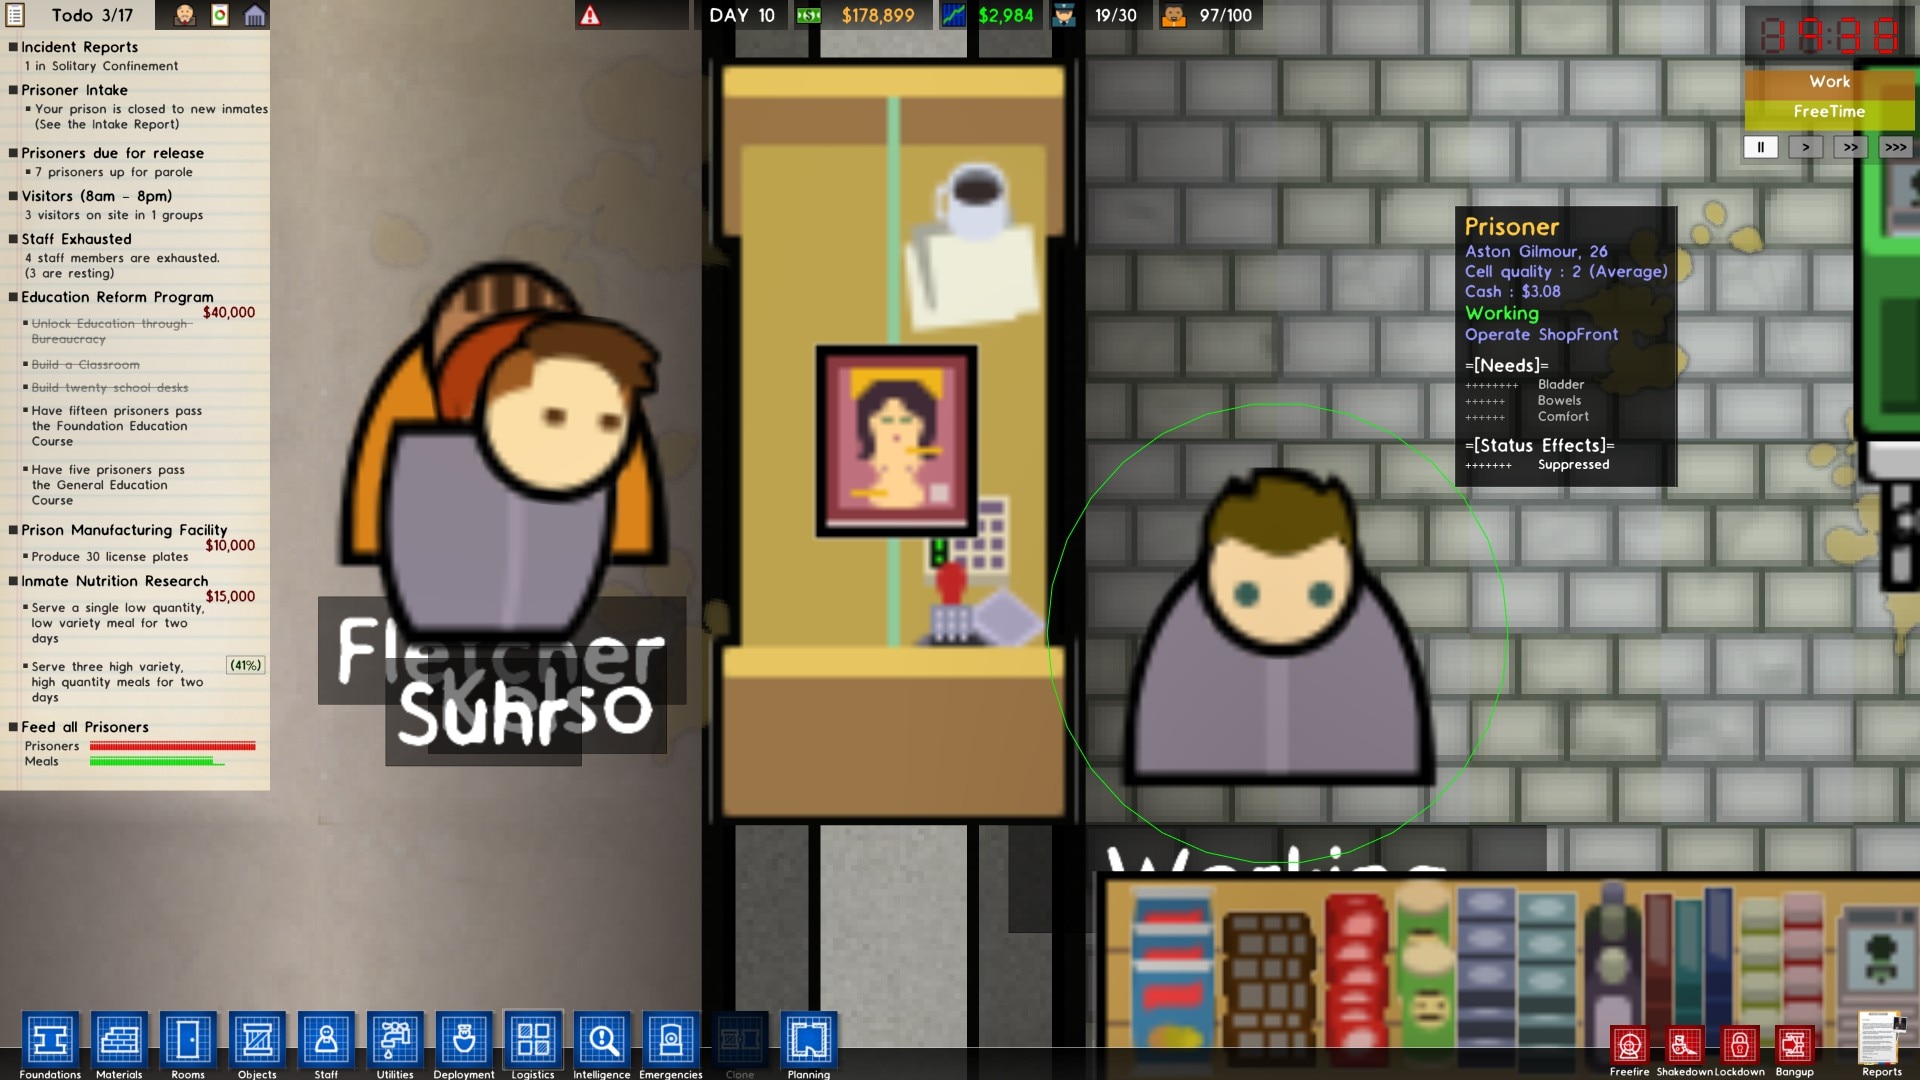 Prison Architect Porn - Steam Community :: Screenshot :: Porn is allowed in prison apparently